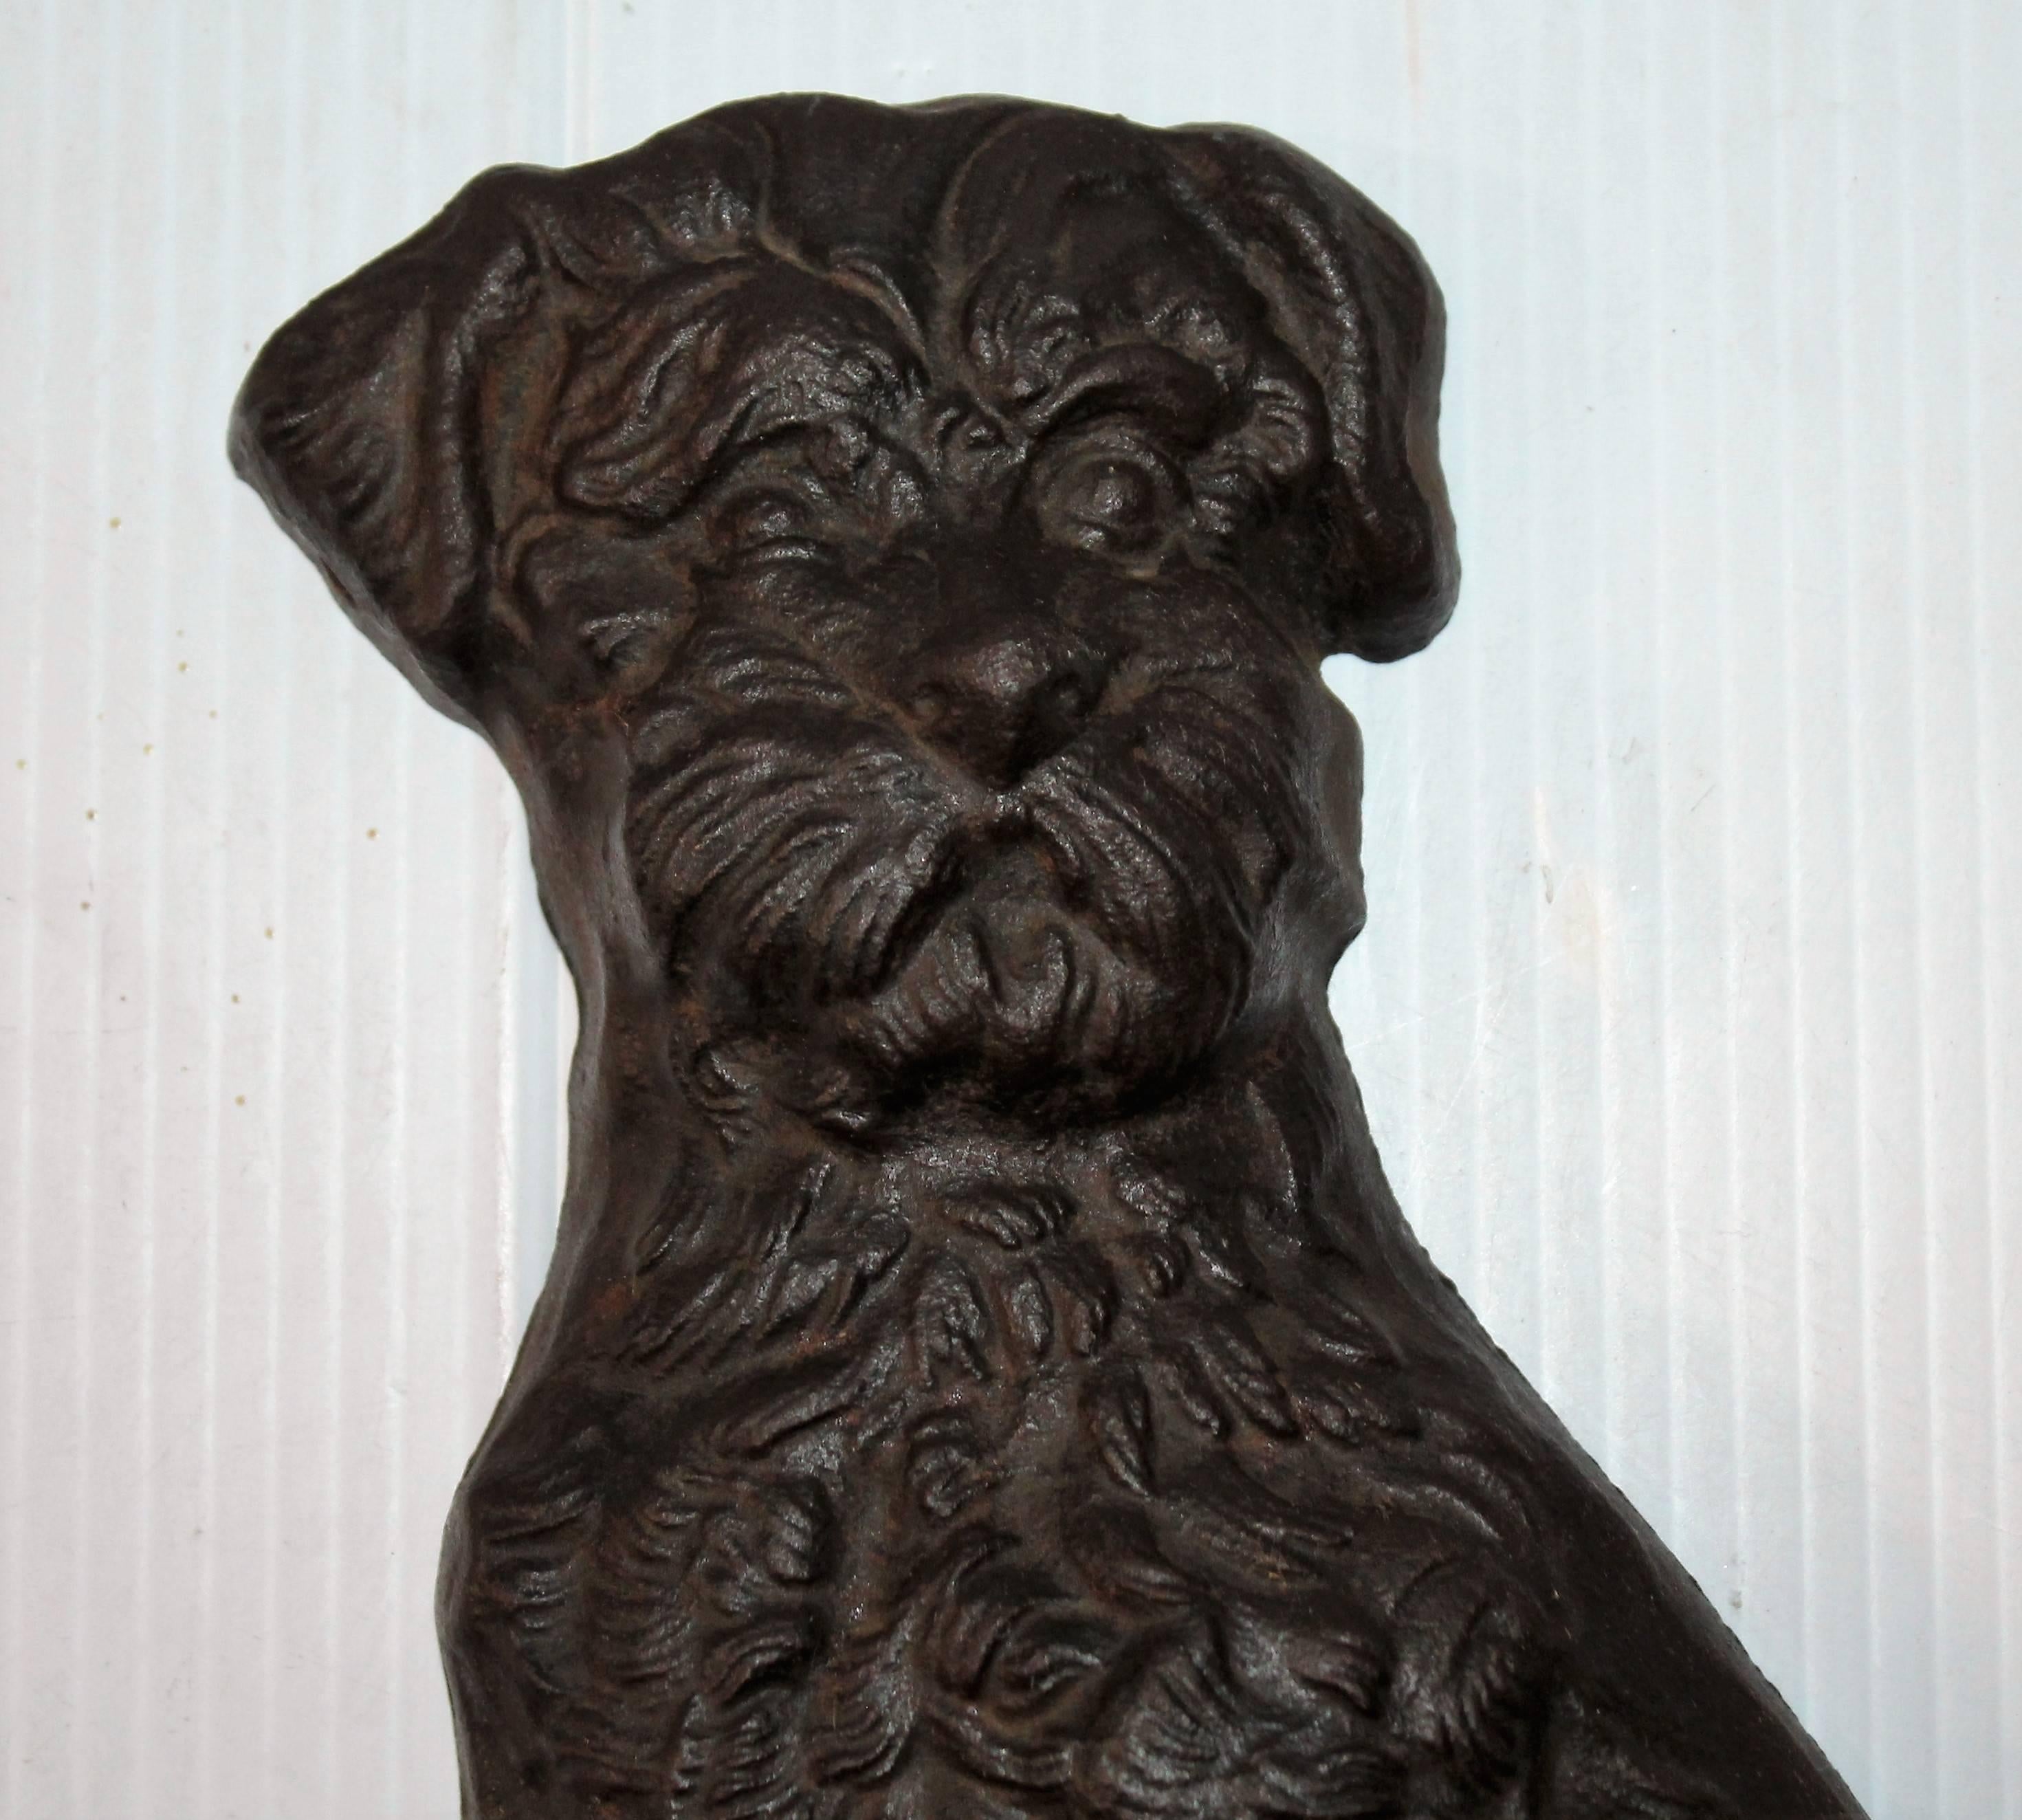 This large folky dog doorstop has a great look for a profile of his body. This iron dog has a makers mark of LB 71. Looks like Snoucher.